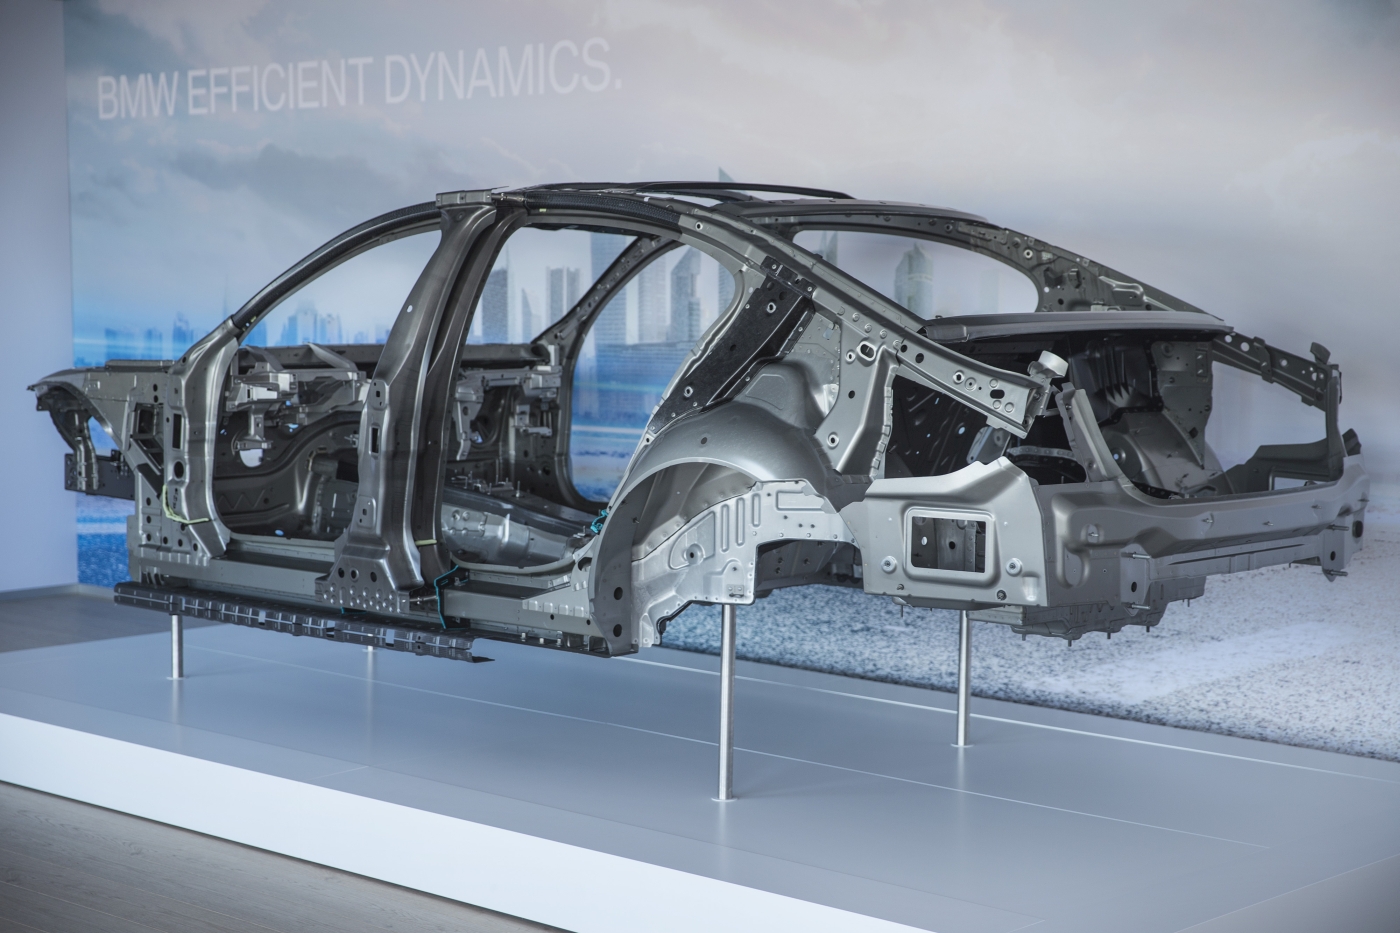 The company will be showcasing its ‘Carbon Core’ body which forms part of the new BMW 7 series.